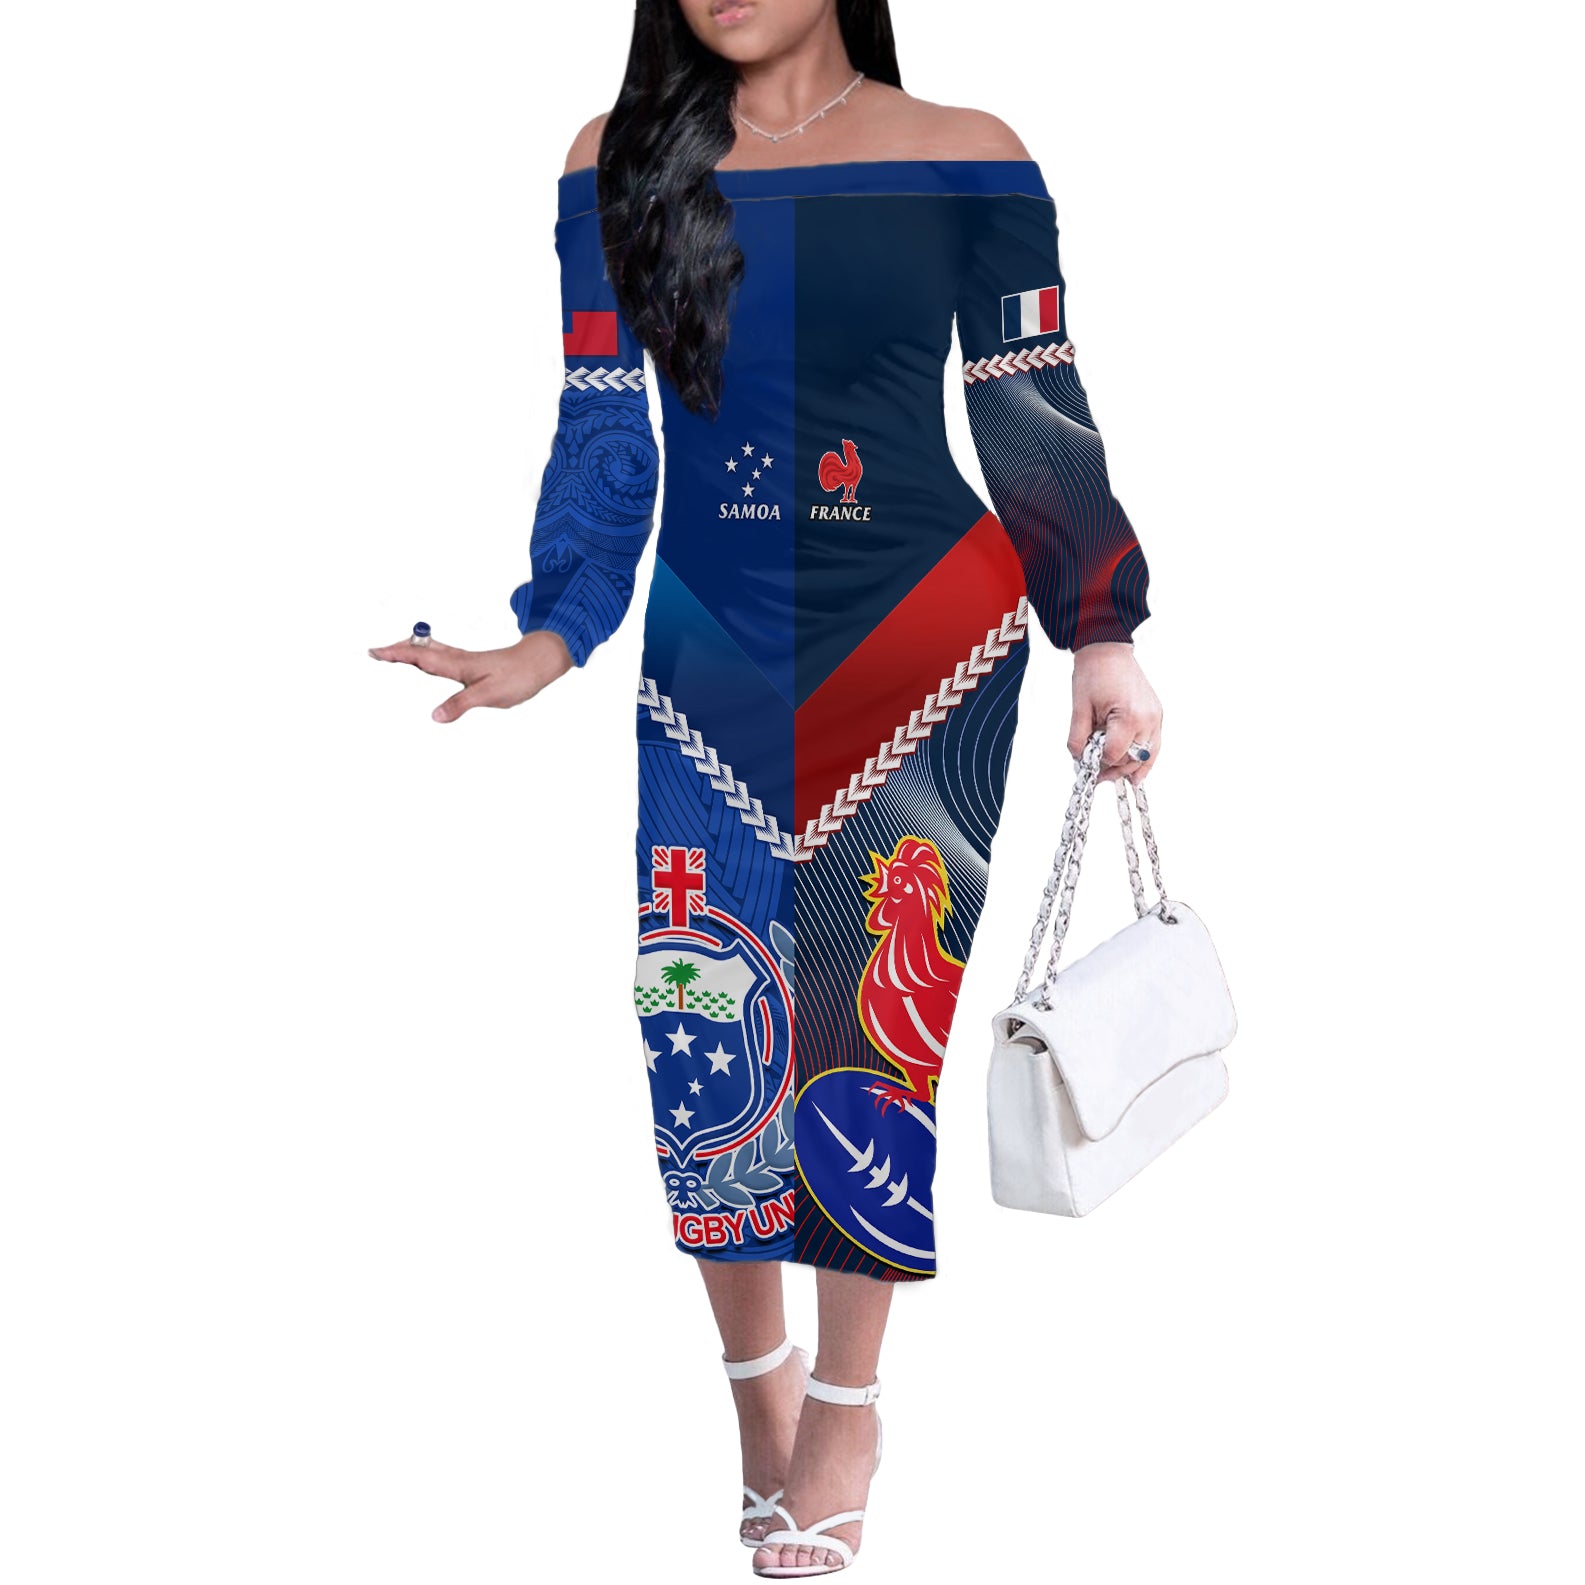 samoa-and-france-rugby-off-the-shoulder-long-sleeve-dress-2023-world-cup-manu-samoa-with-les-bleus